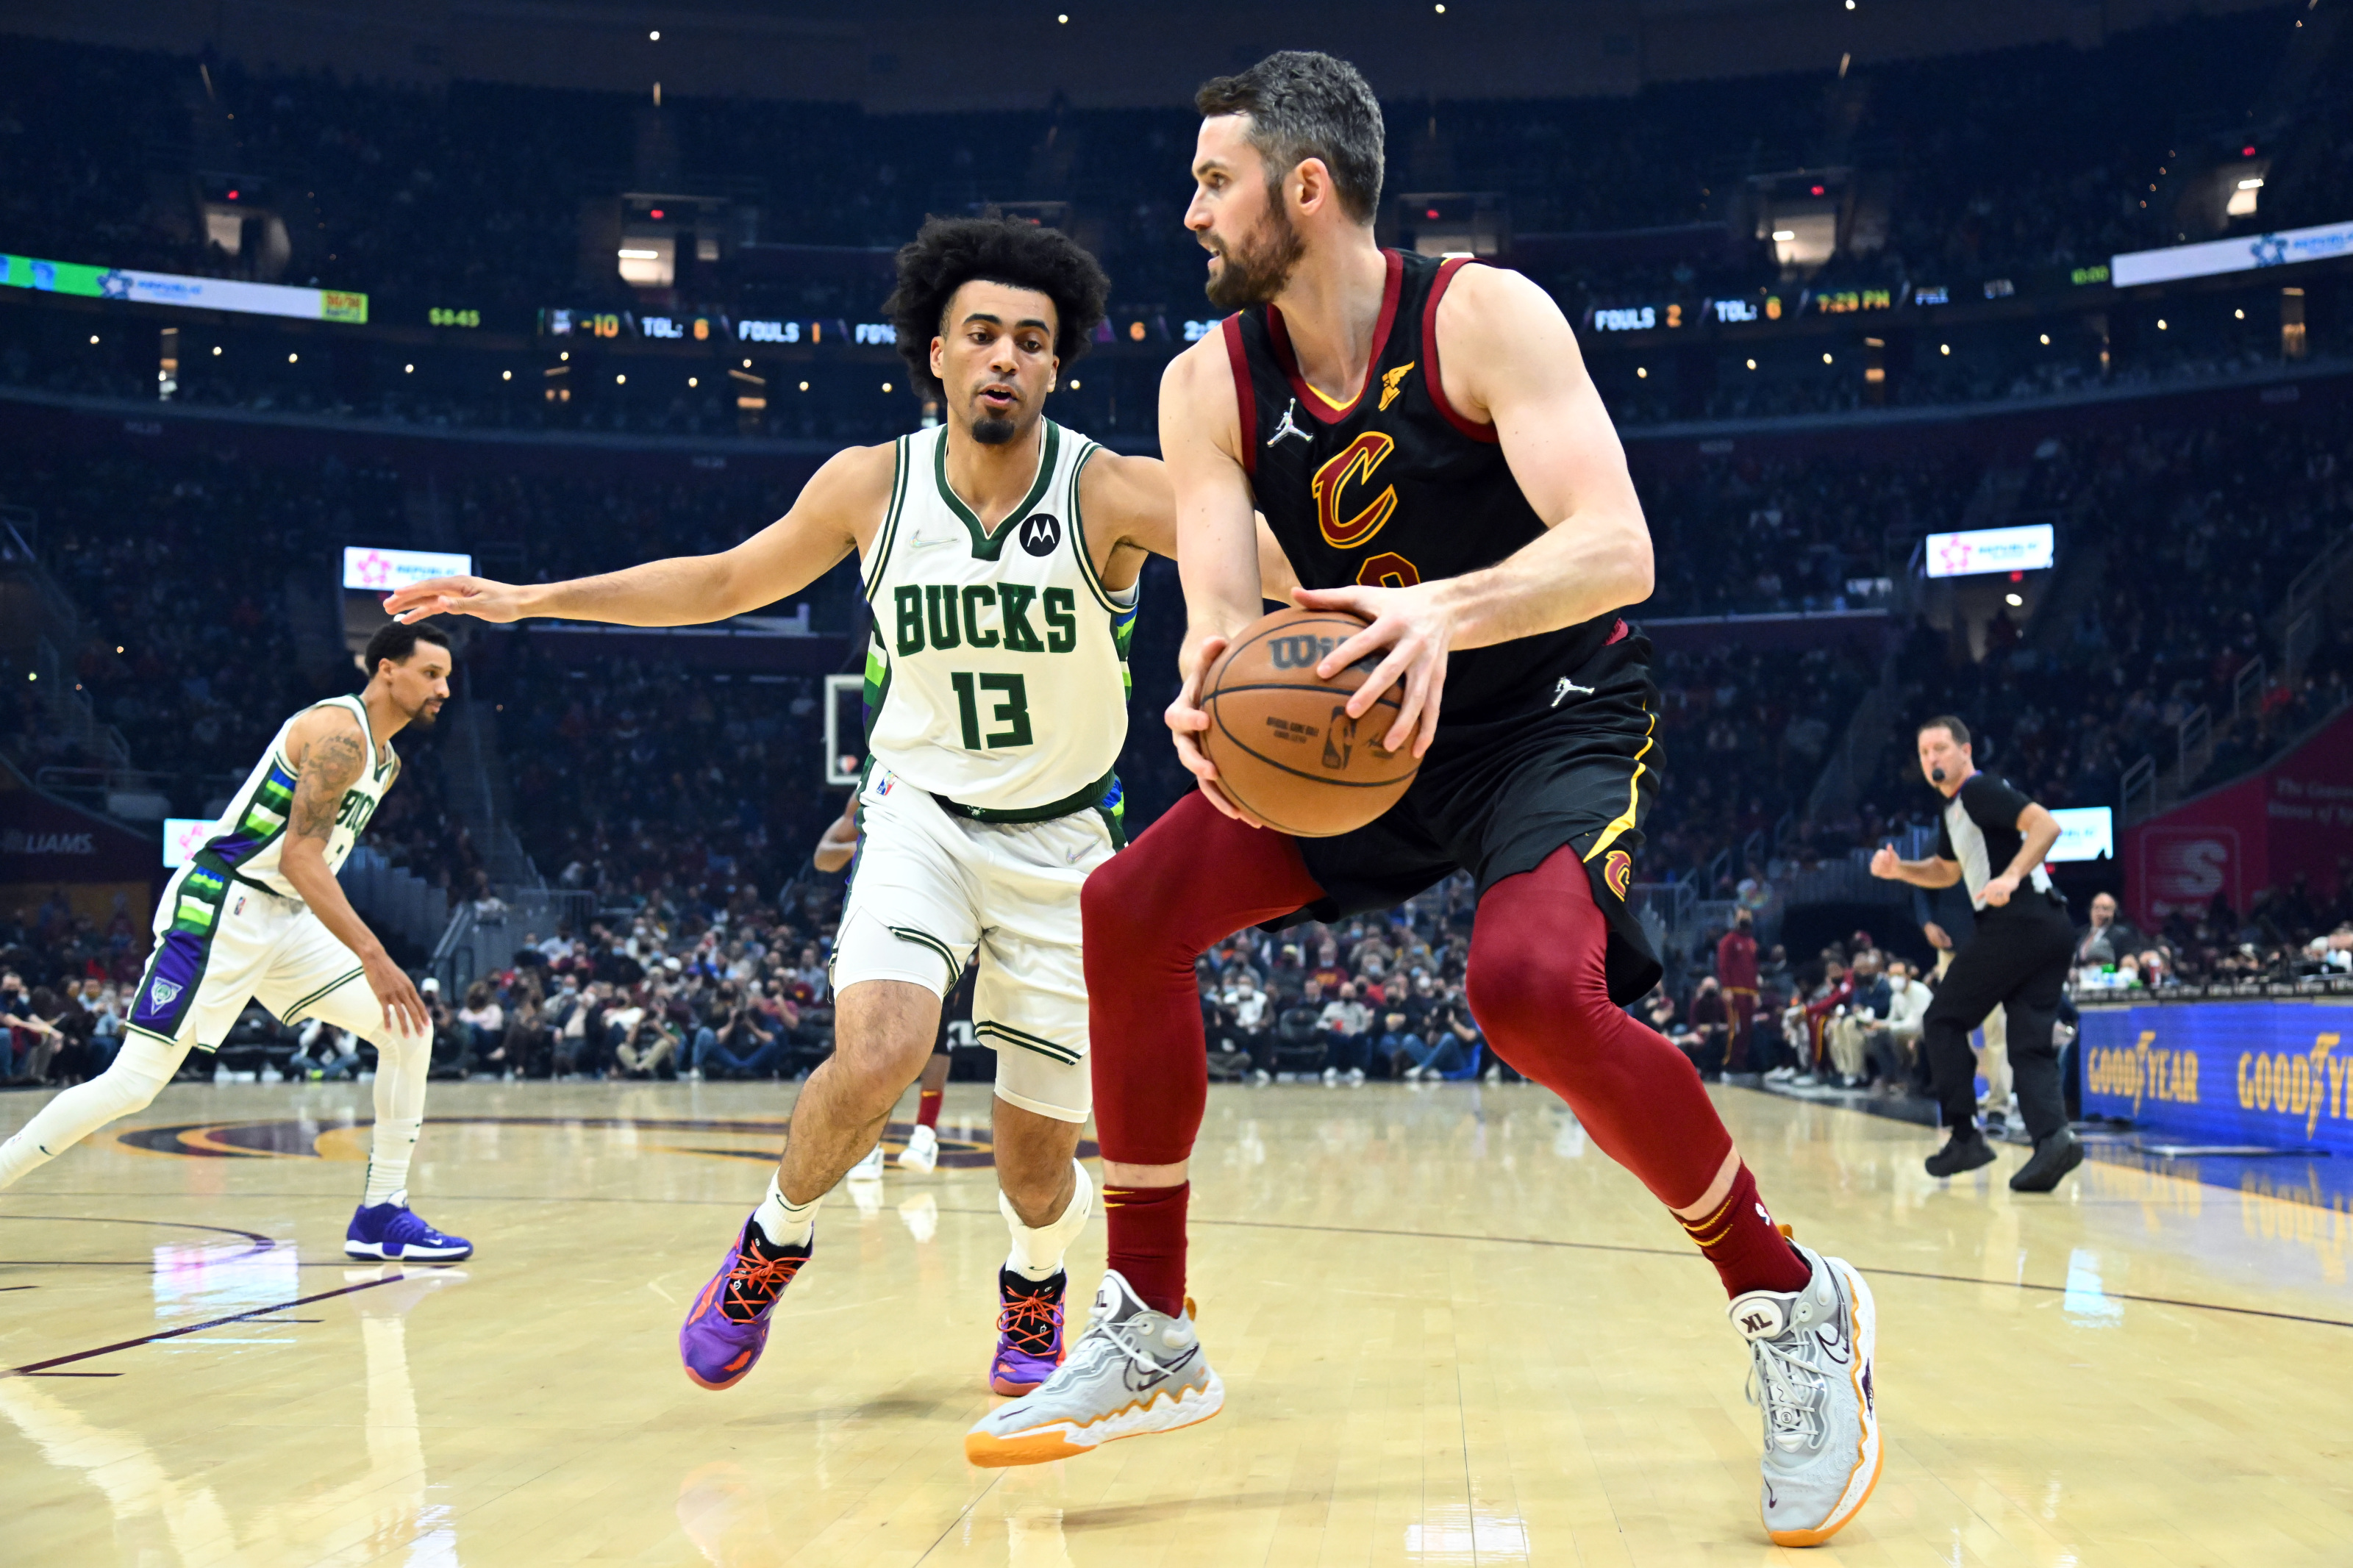 Cavs-Bucks Starters, betting info, injuries and TV channel for Sunday